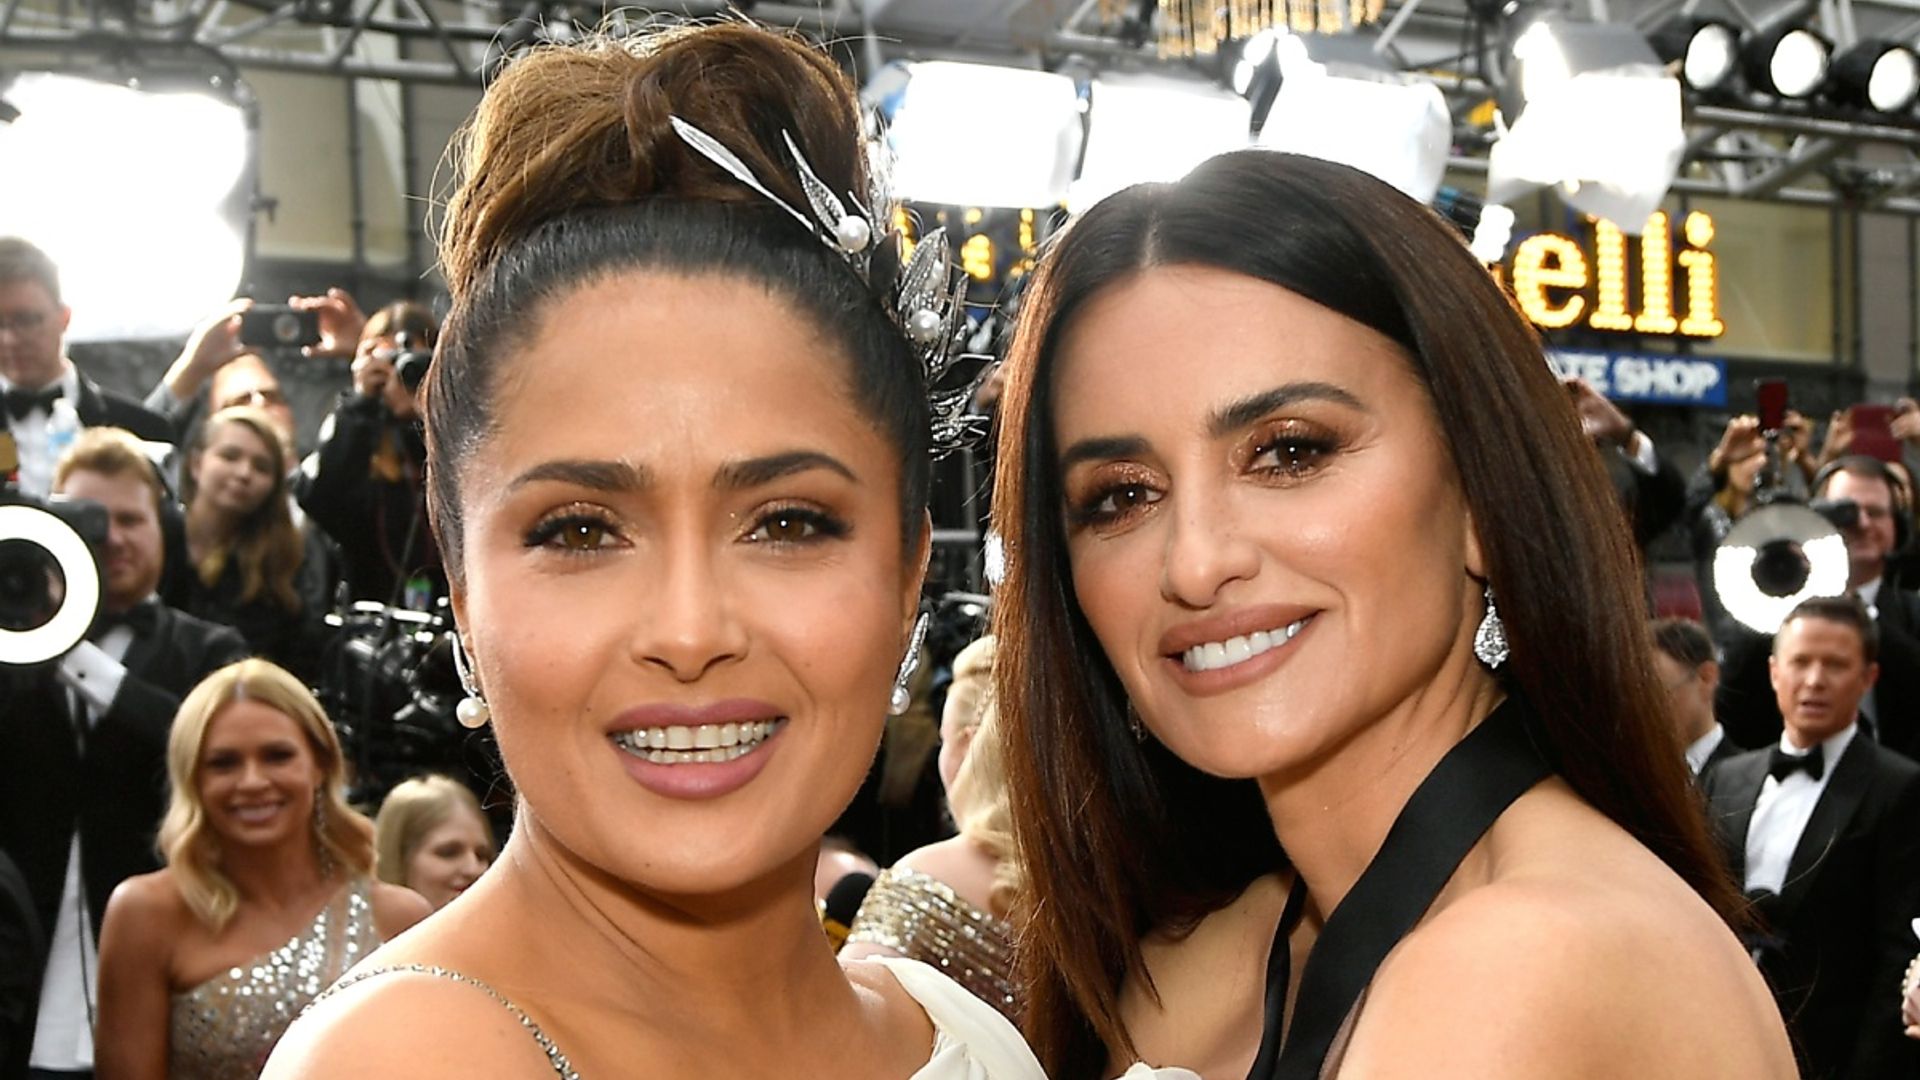 Salma Hayek pays tribute to Penelope Cruz with a throwback you need to see